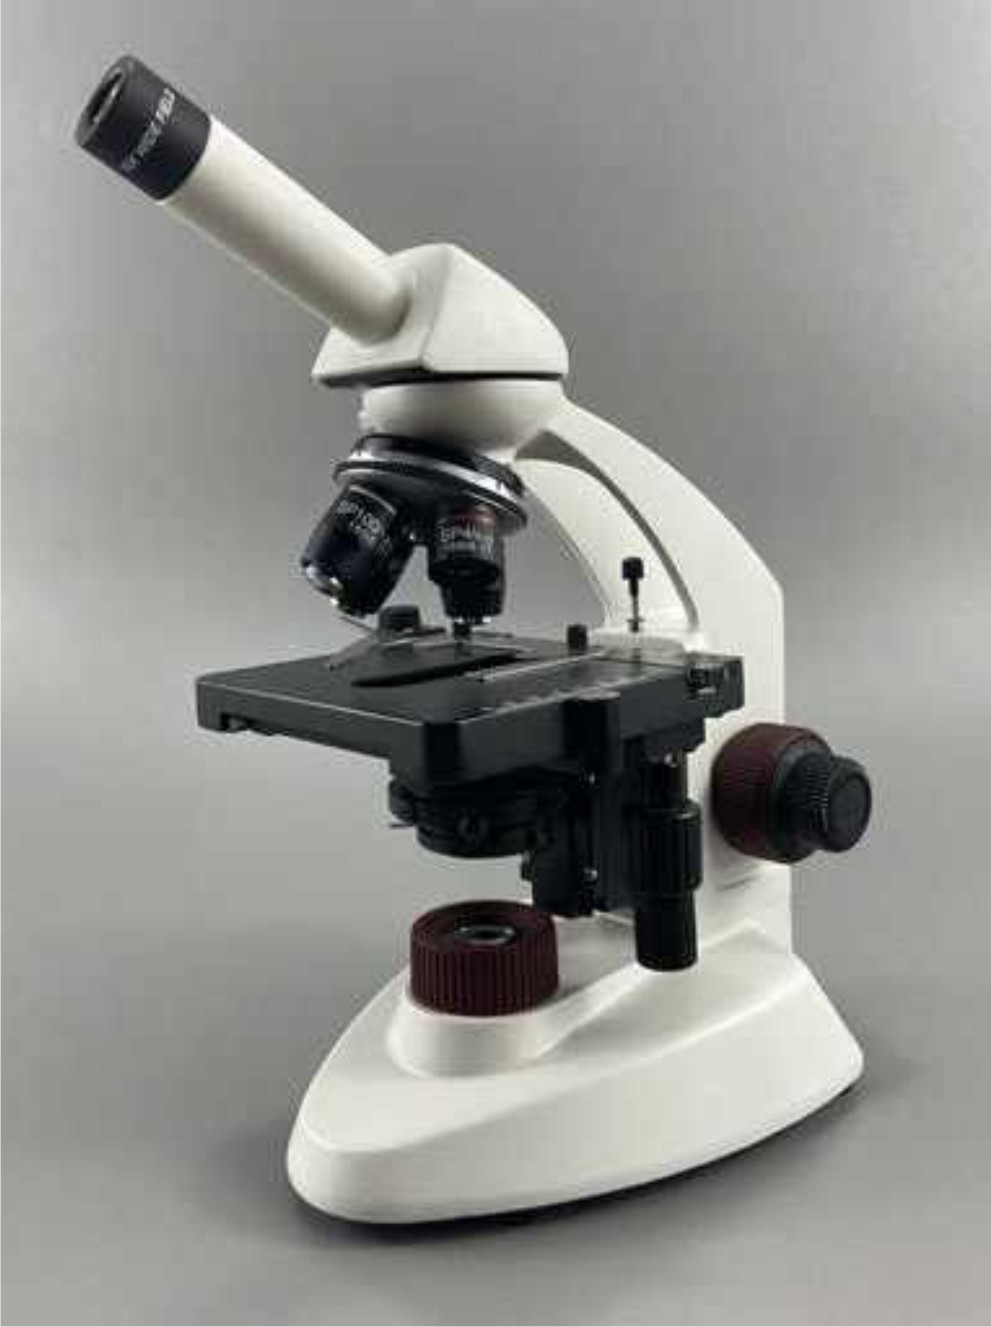 controller/assets/products_upload/Coaxial Focusing Modern Pathological Microscope, Model No.: KI - COAXP